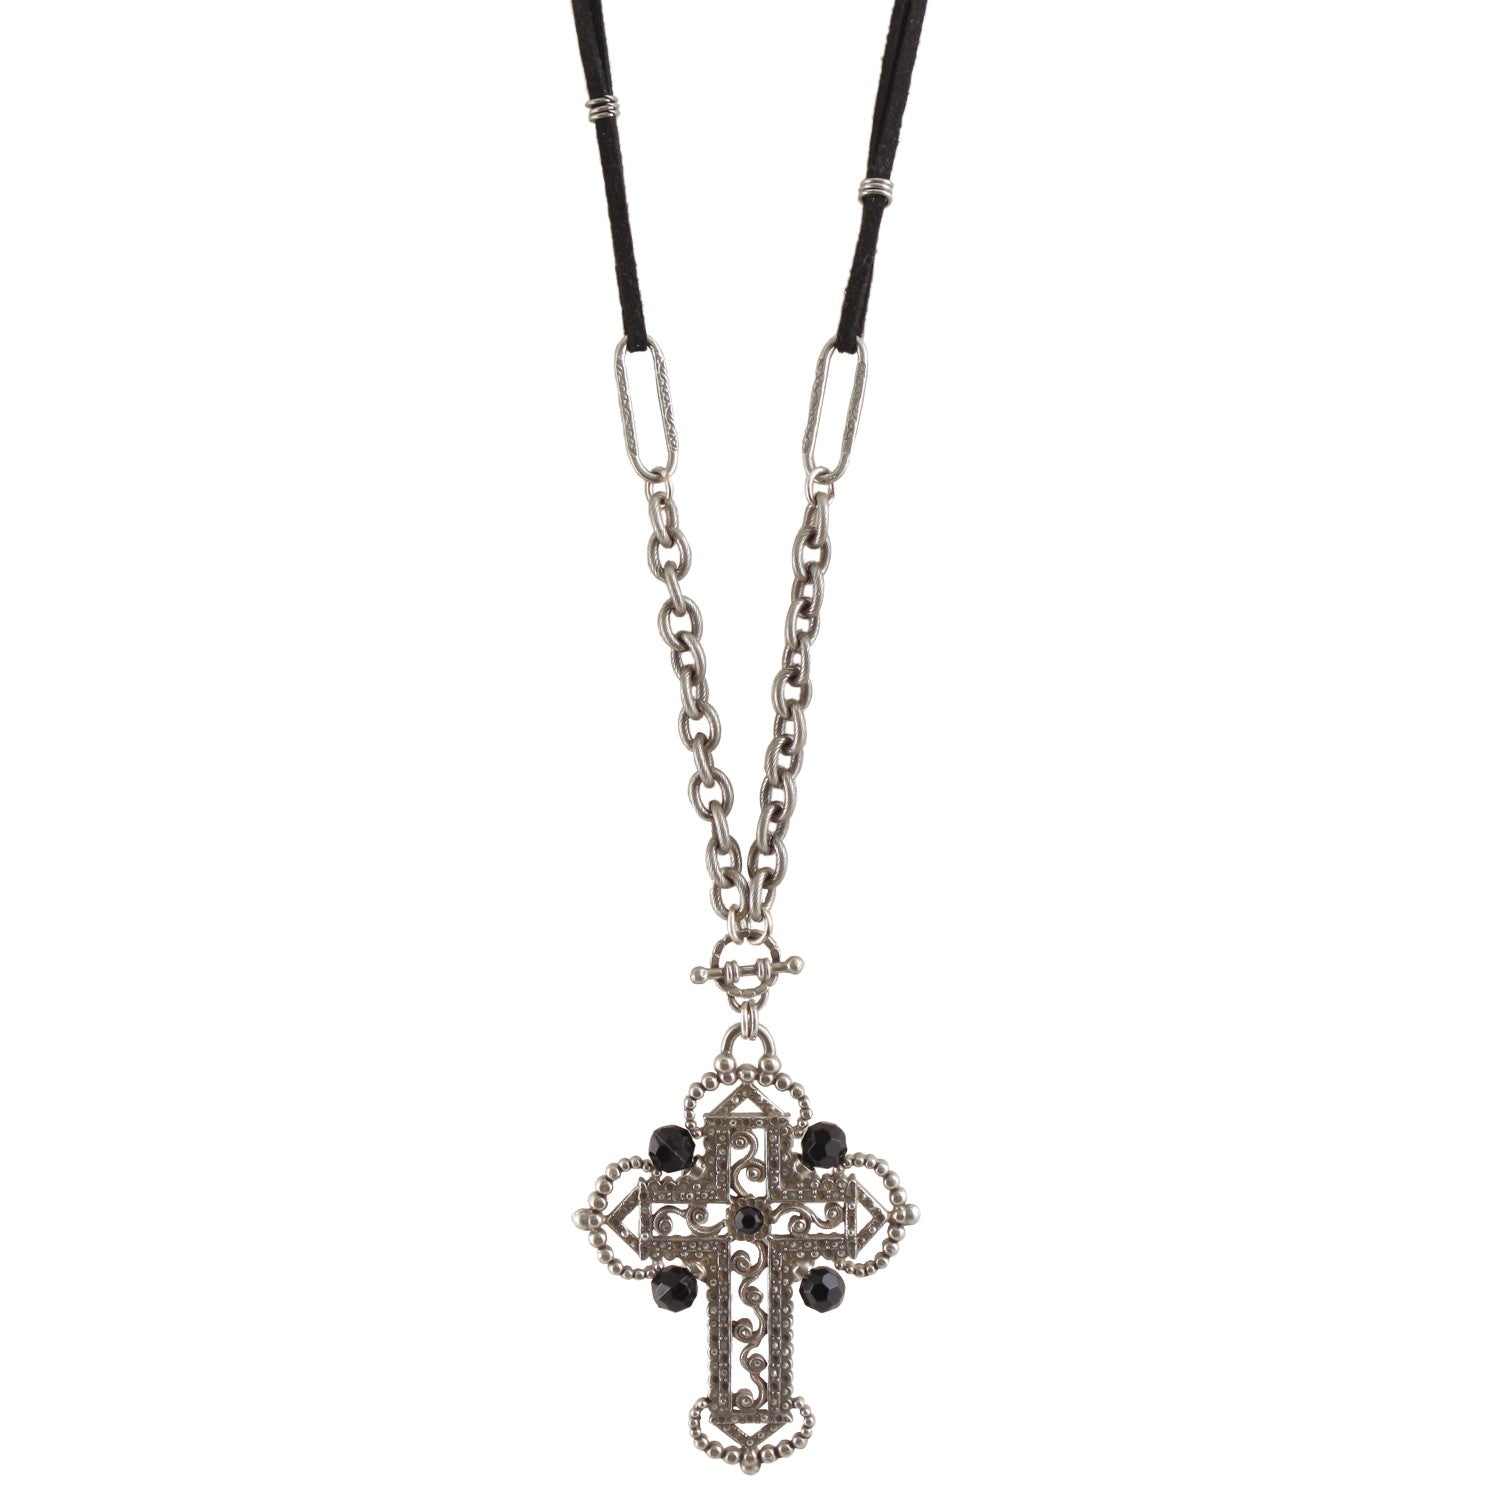 Emerald - Necklace - Ornate cross in solid silver - Renewal, hope and  spiritual guidance - Necklace with pendant - Catawiki